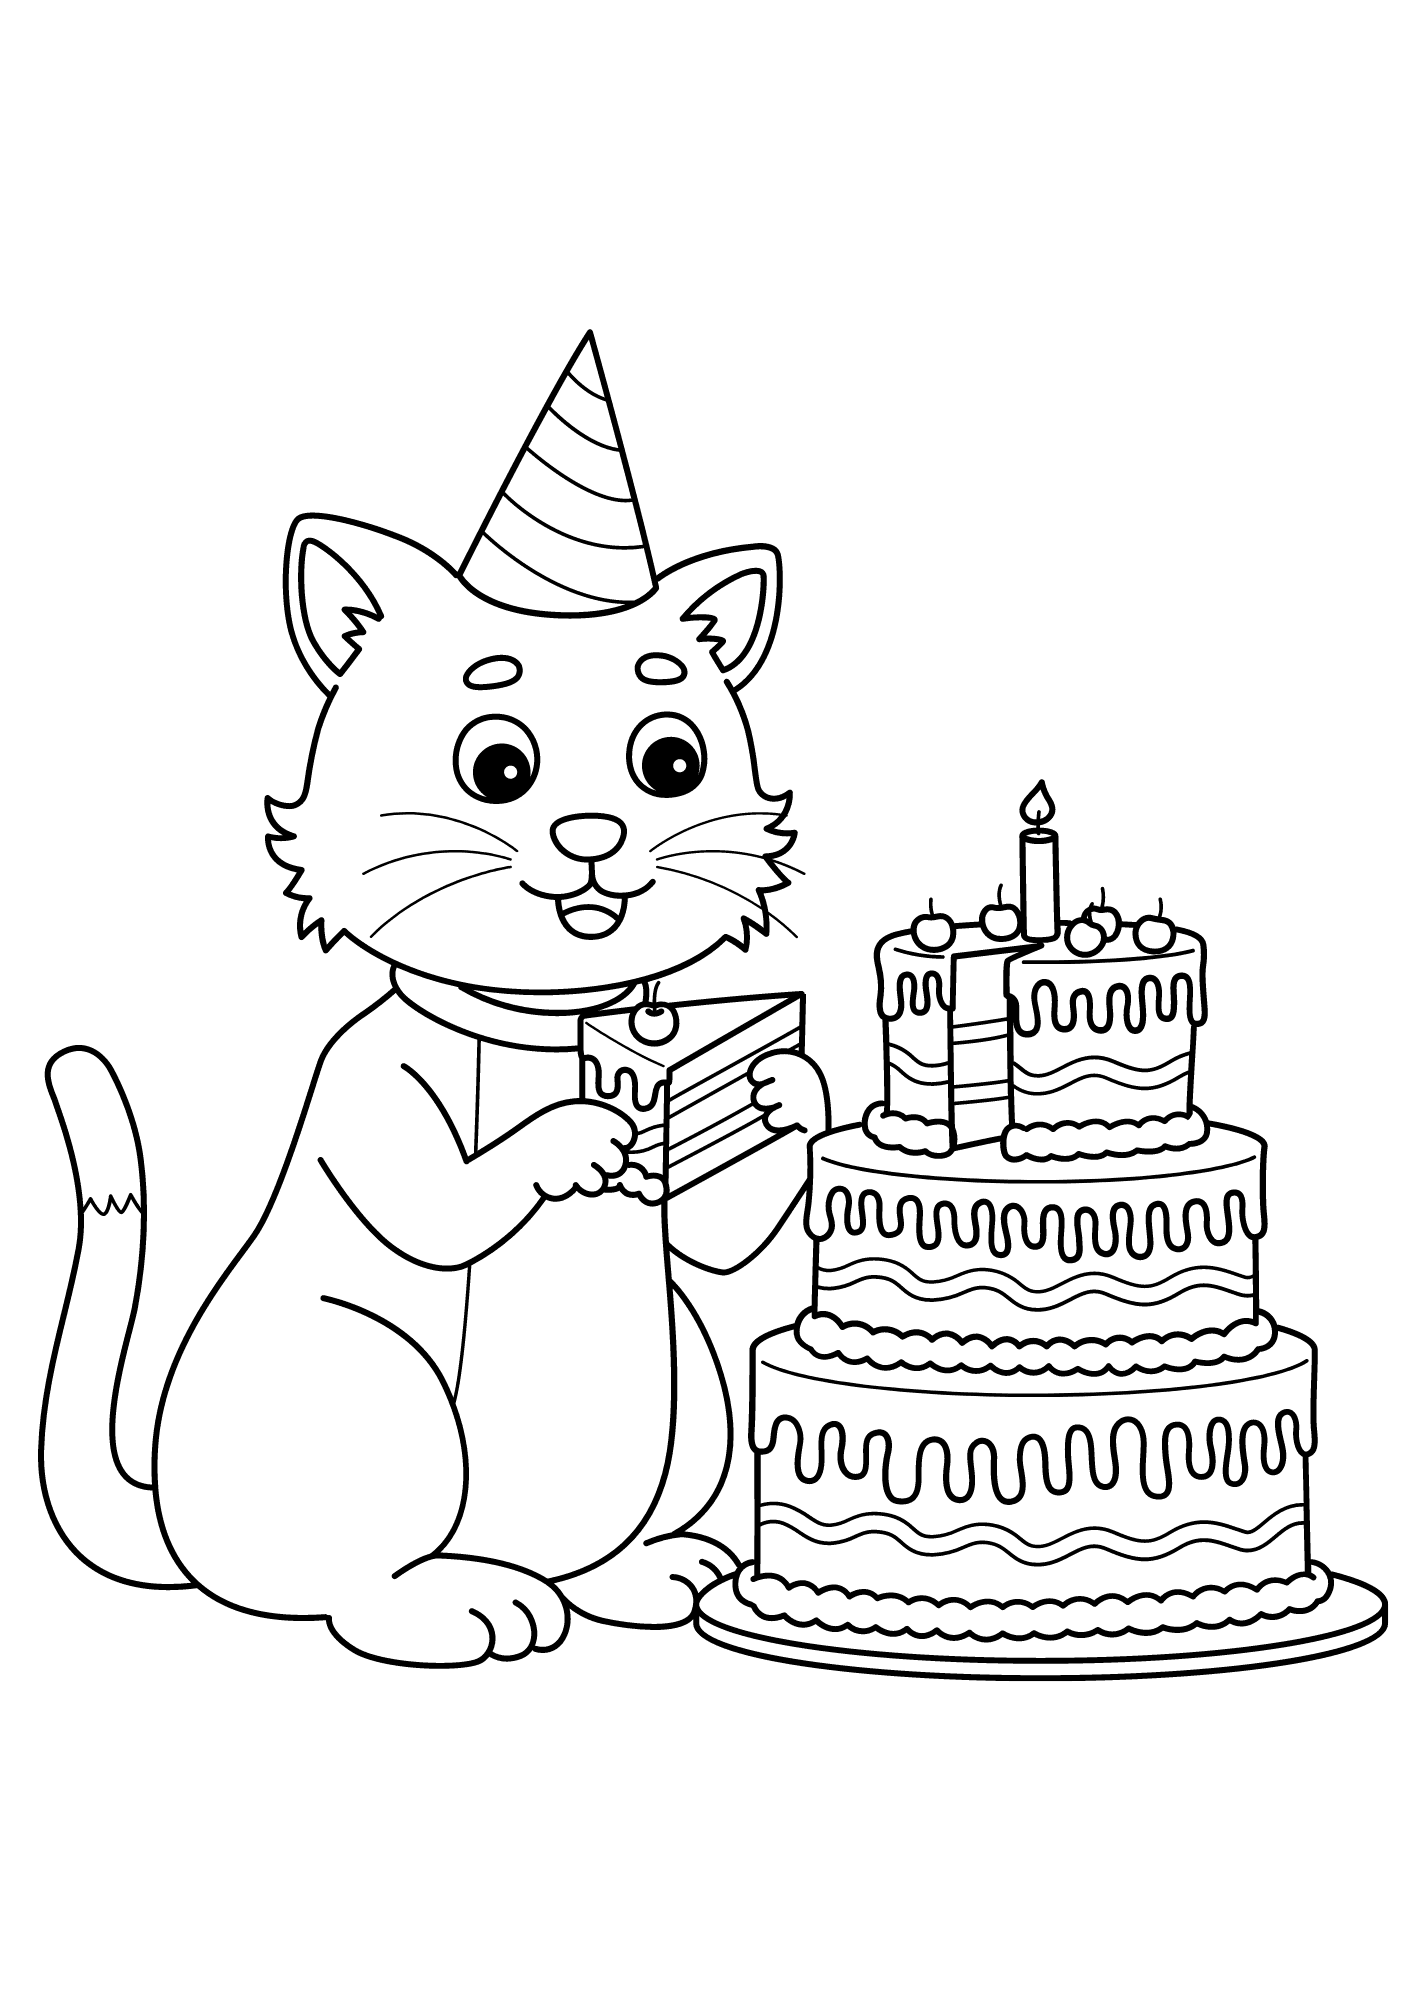 Cat With A Birthday Cake Coloring Page